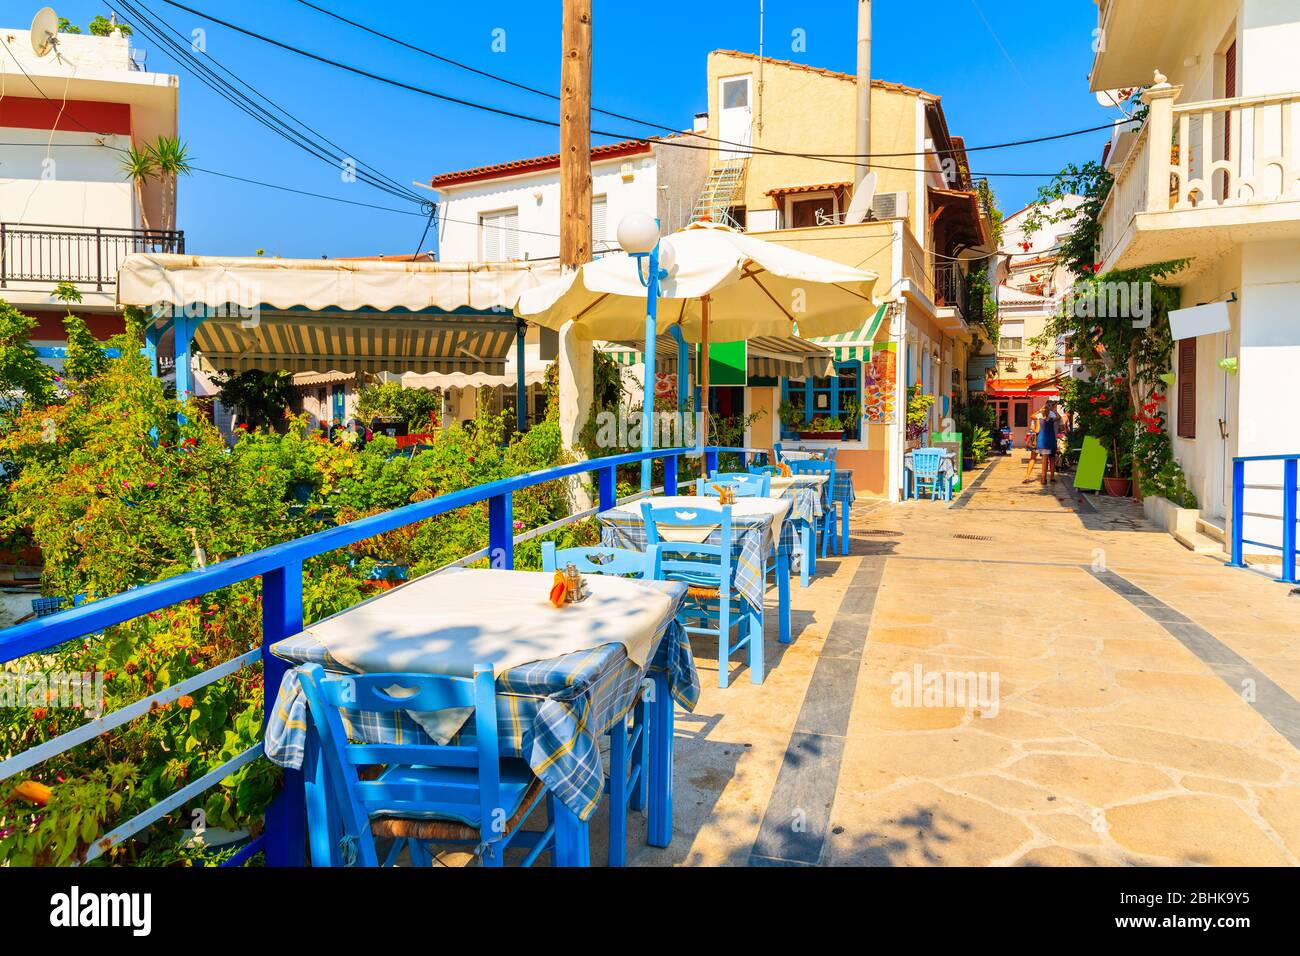 Tables with chairs in traditional Greek taverna on street of Kokkari town, Greece Stock Photo